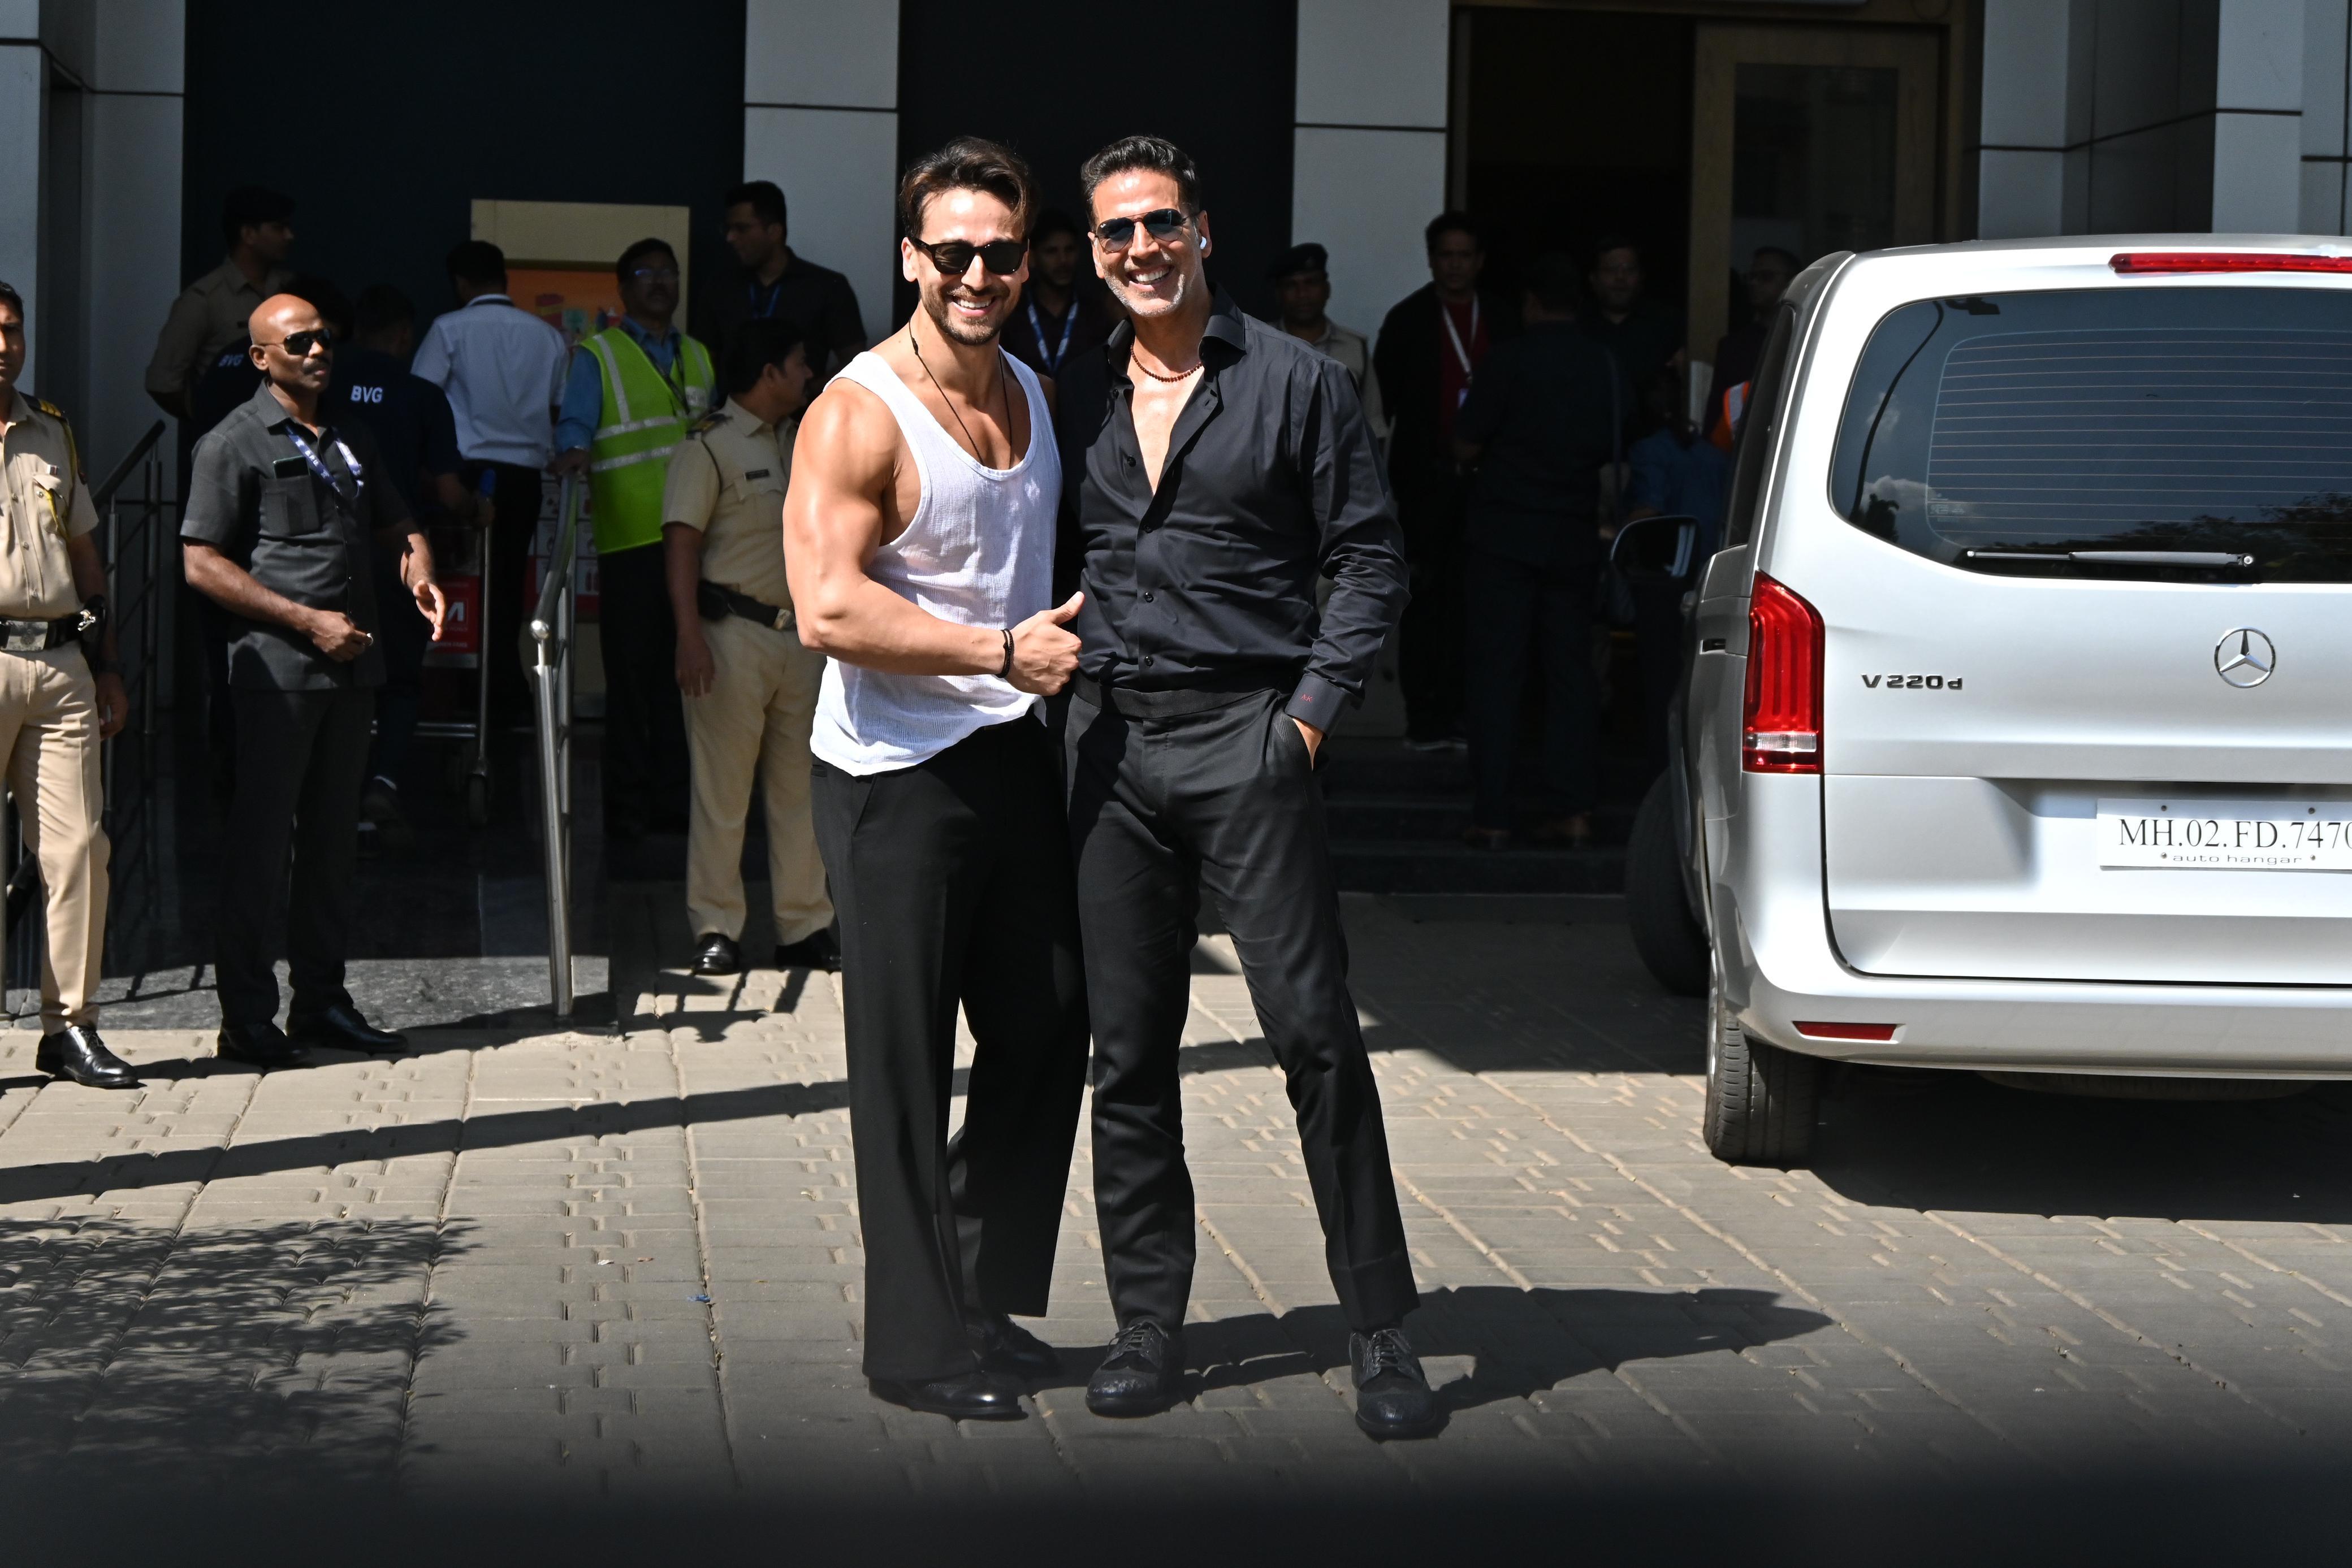 Tiger Shroff and Akshay Kumar were clicked at the airport as they jetted off to Goa